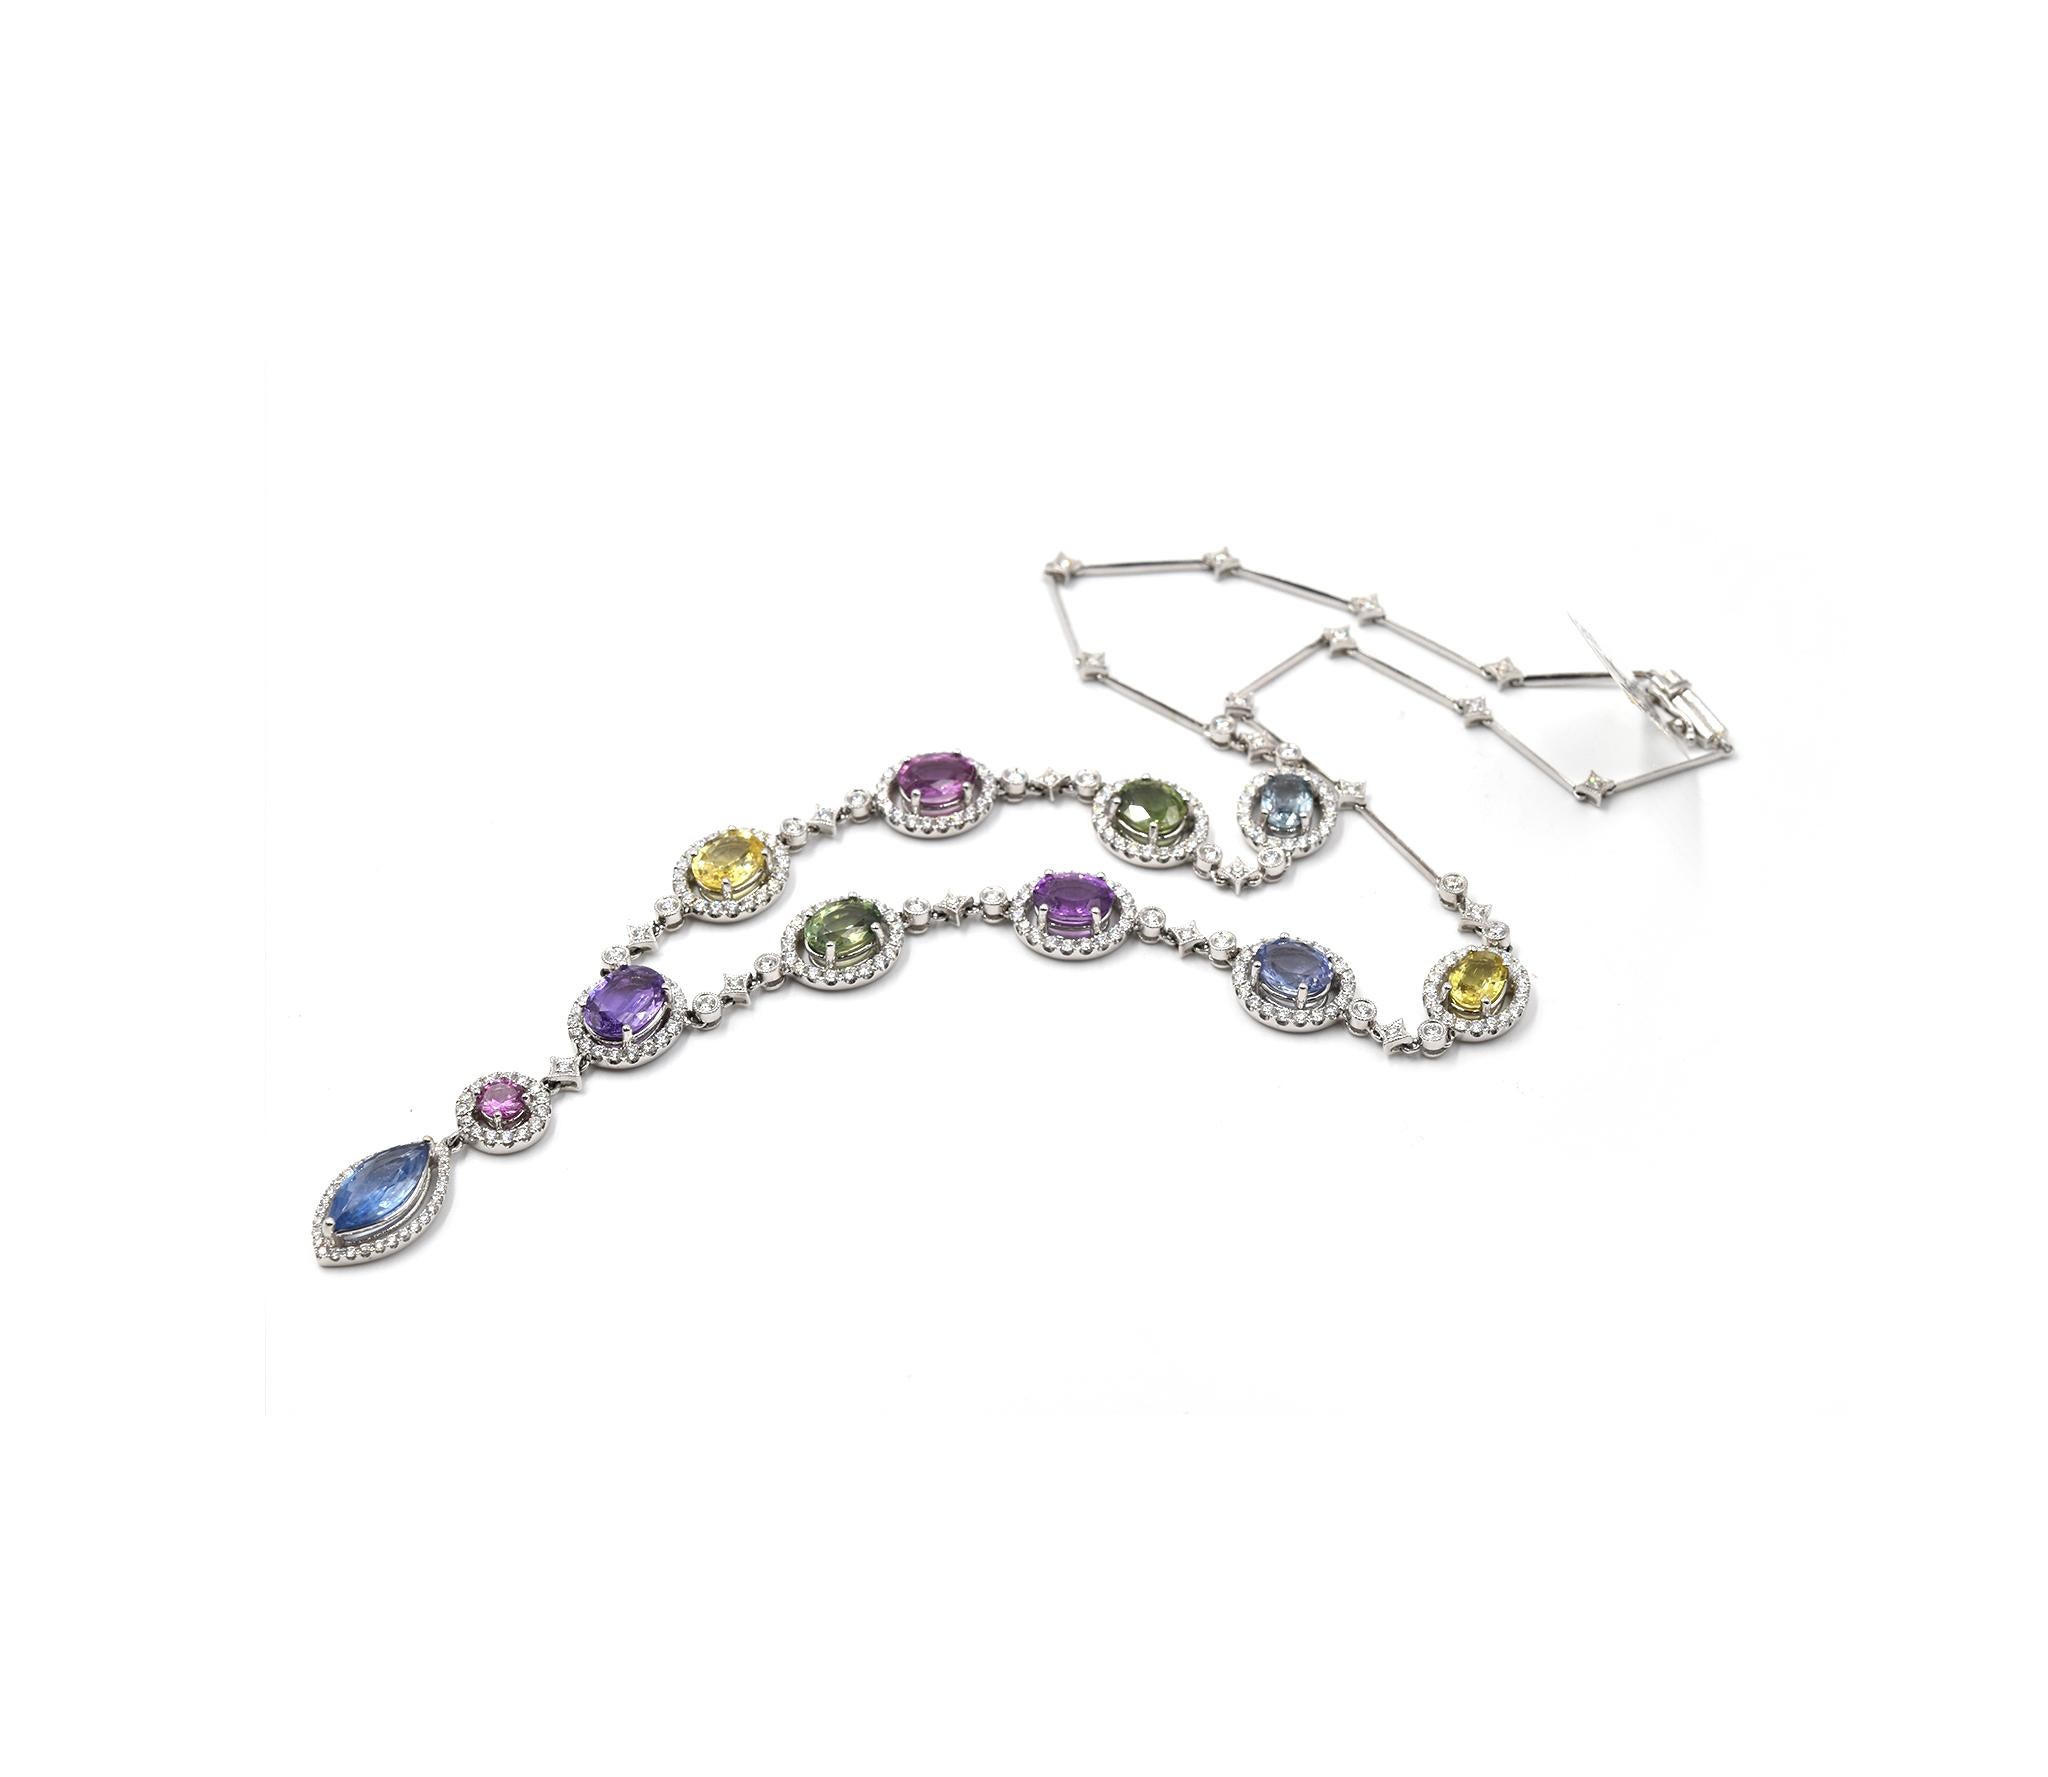 Designer: custom design
Material: 18k white gold
Multi-Color Sapphires: 11 multi-color sapphires in round, oval and marquise cut = 15.27 carat weight
Diamonds: 3.13 carat total weight
Dimensions: necklace is 20-inch long
Weight: 29.22 grams
